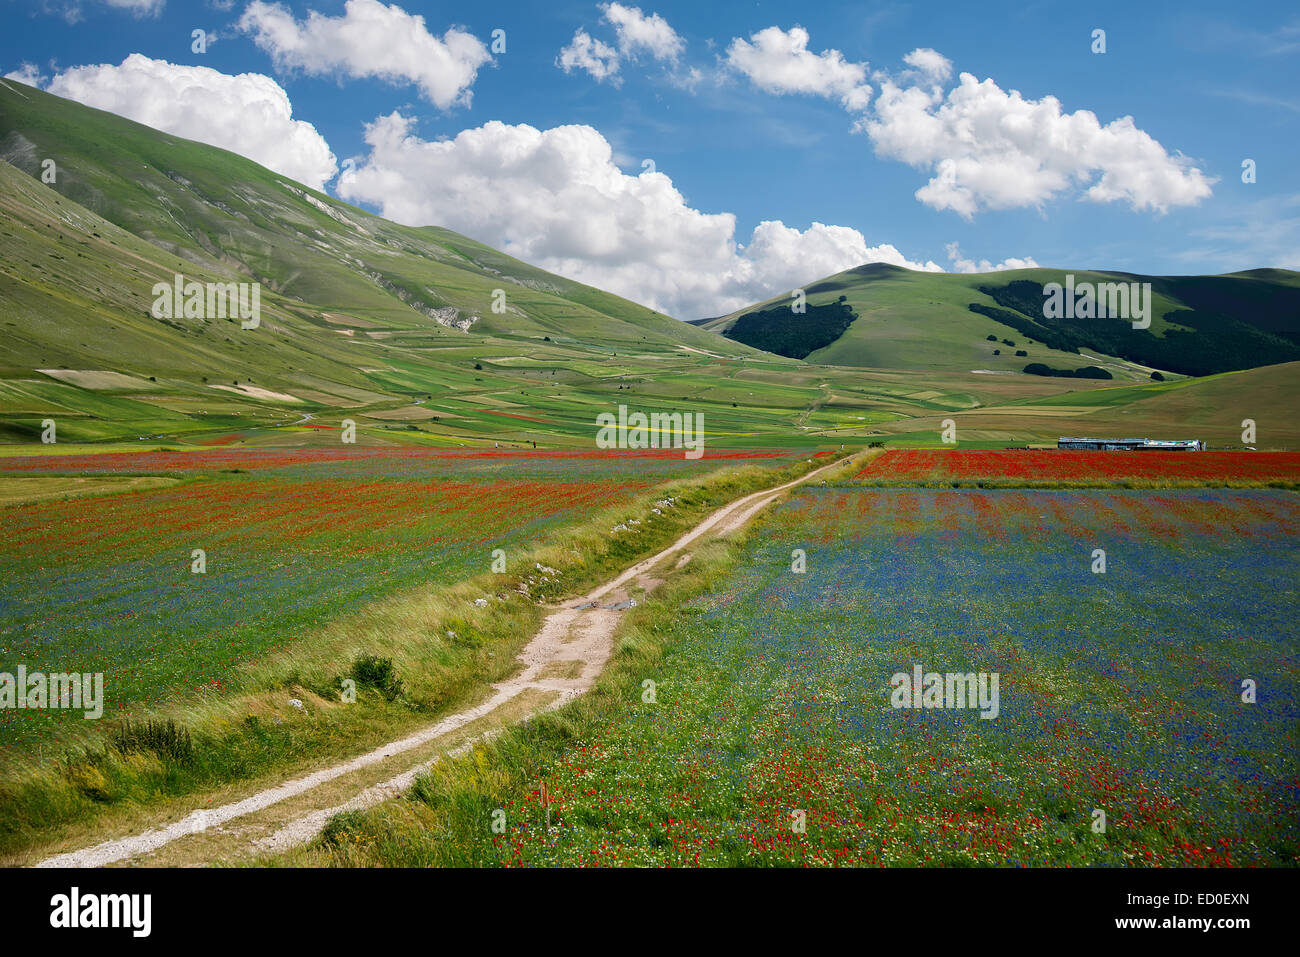 Italy, Umbria, Monti Sibillini National Park, Trail among colors Stock Photo